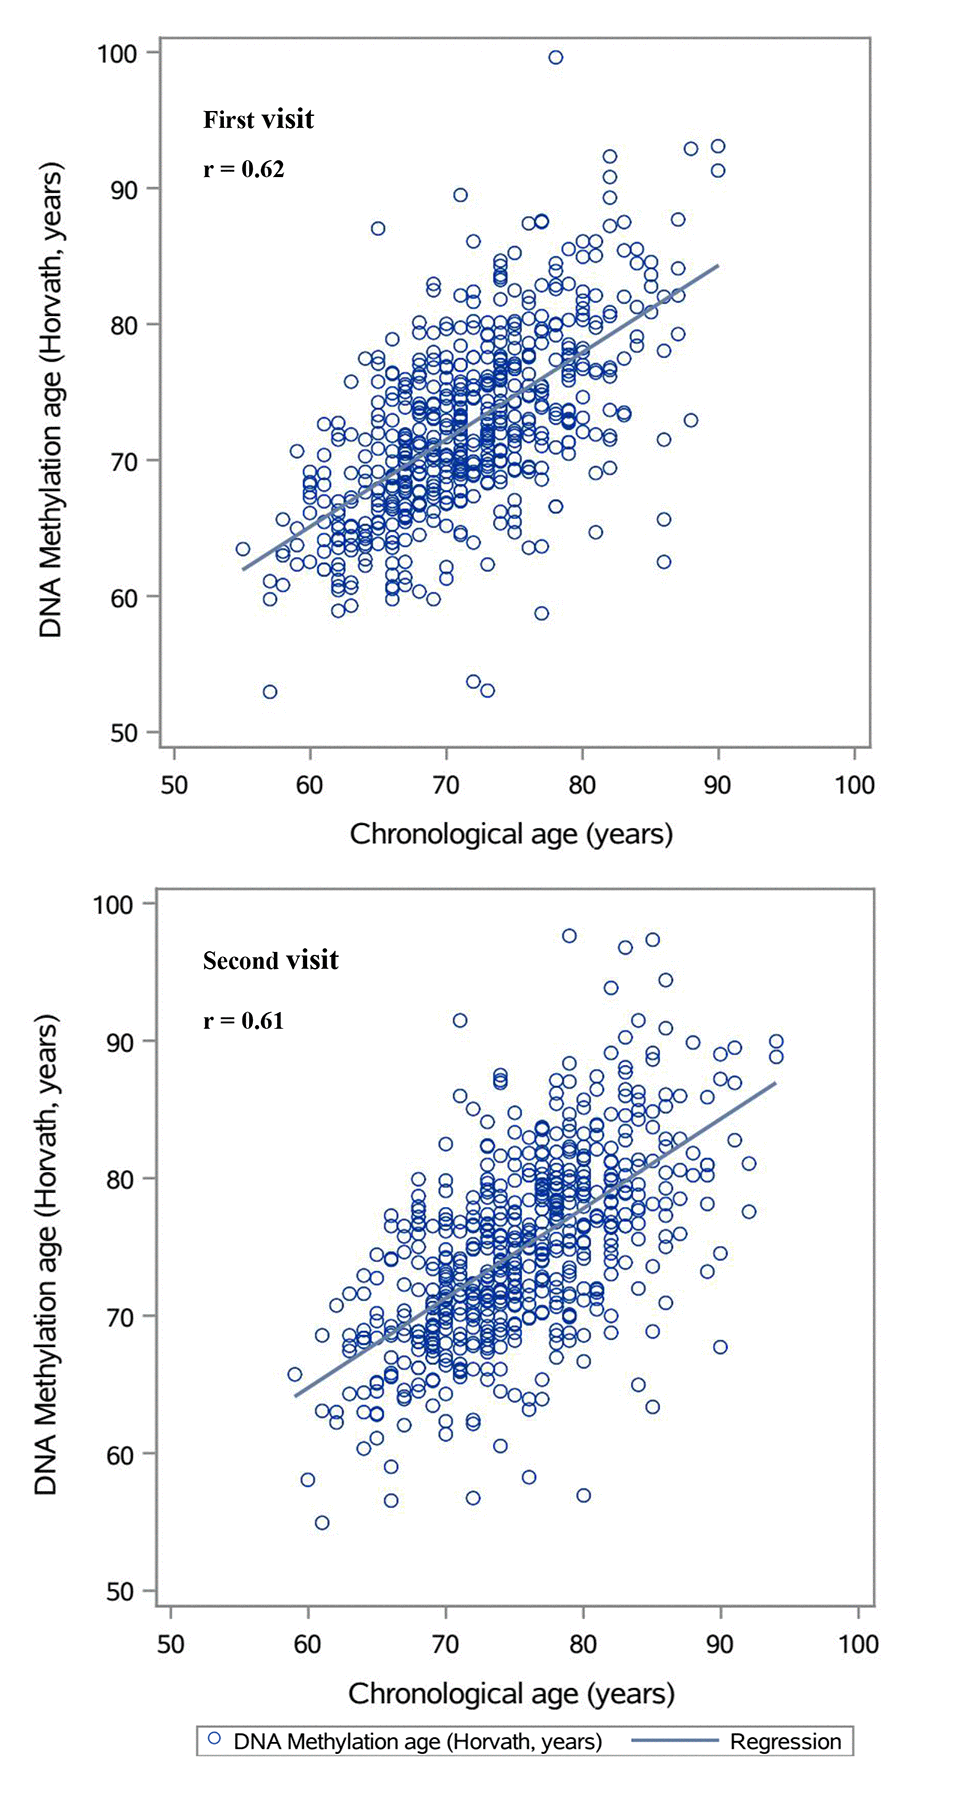 Plots of predicted DNA methylation ages against chronological age.